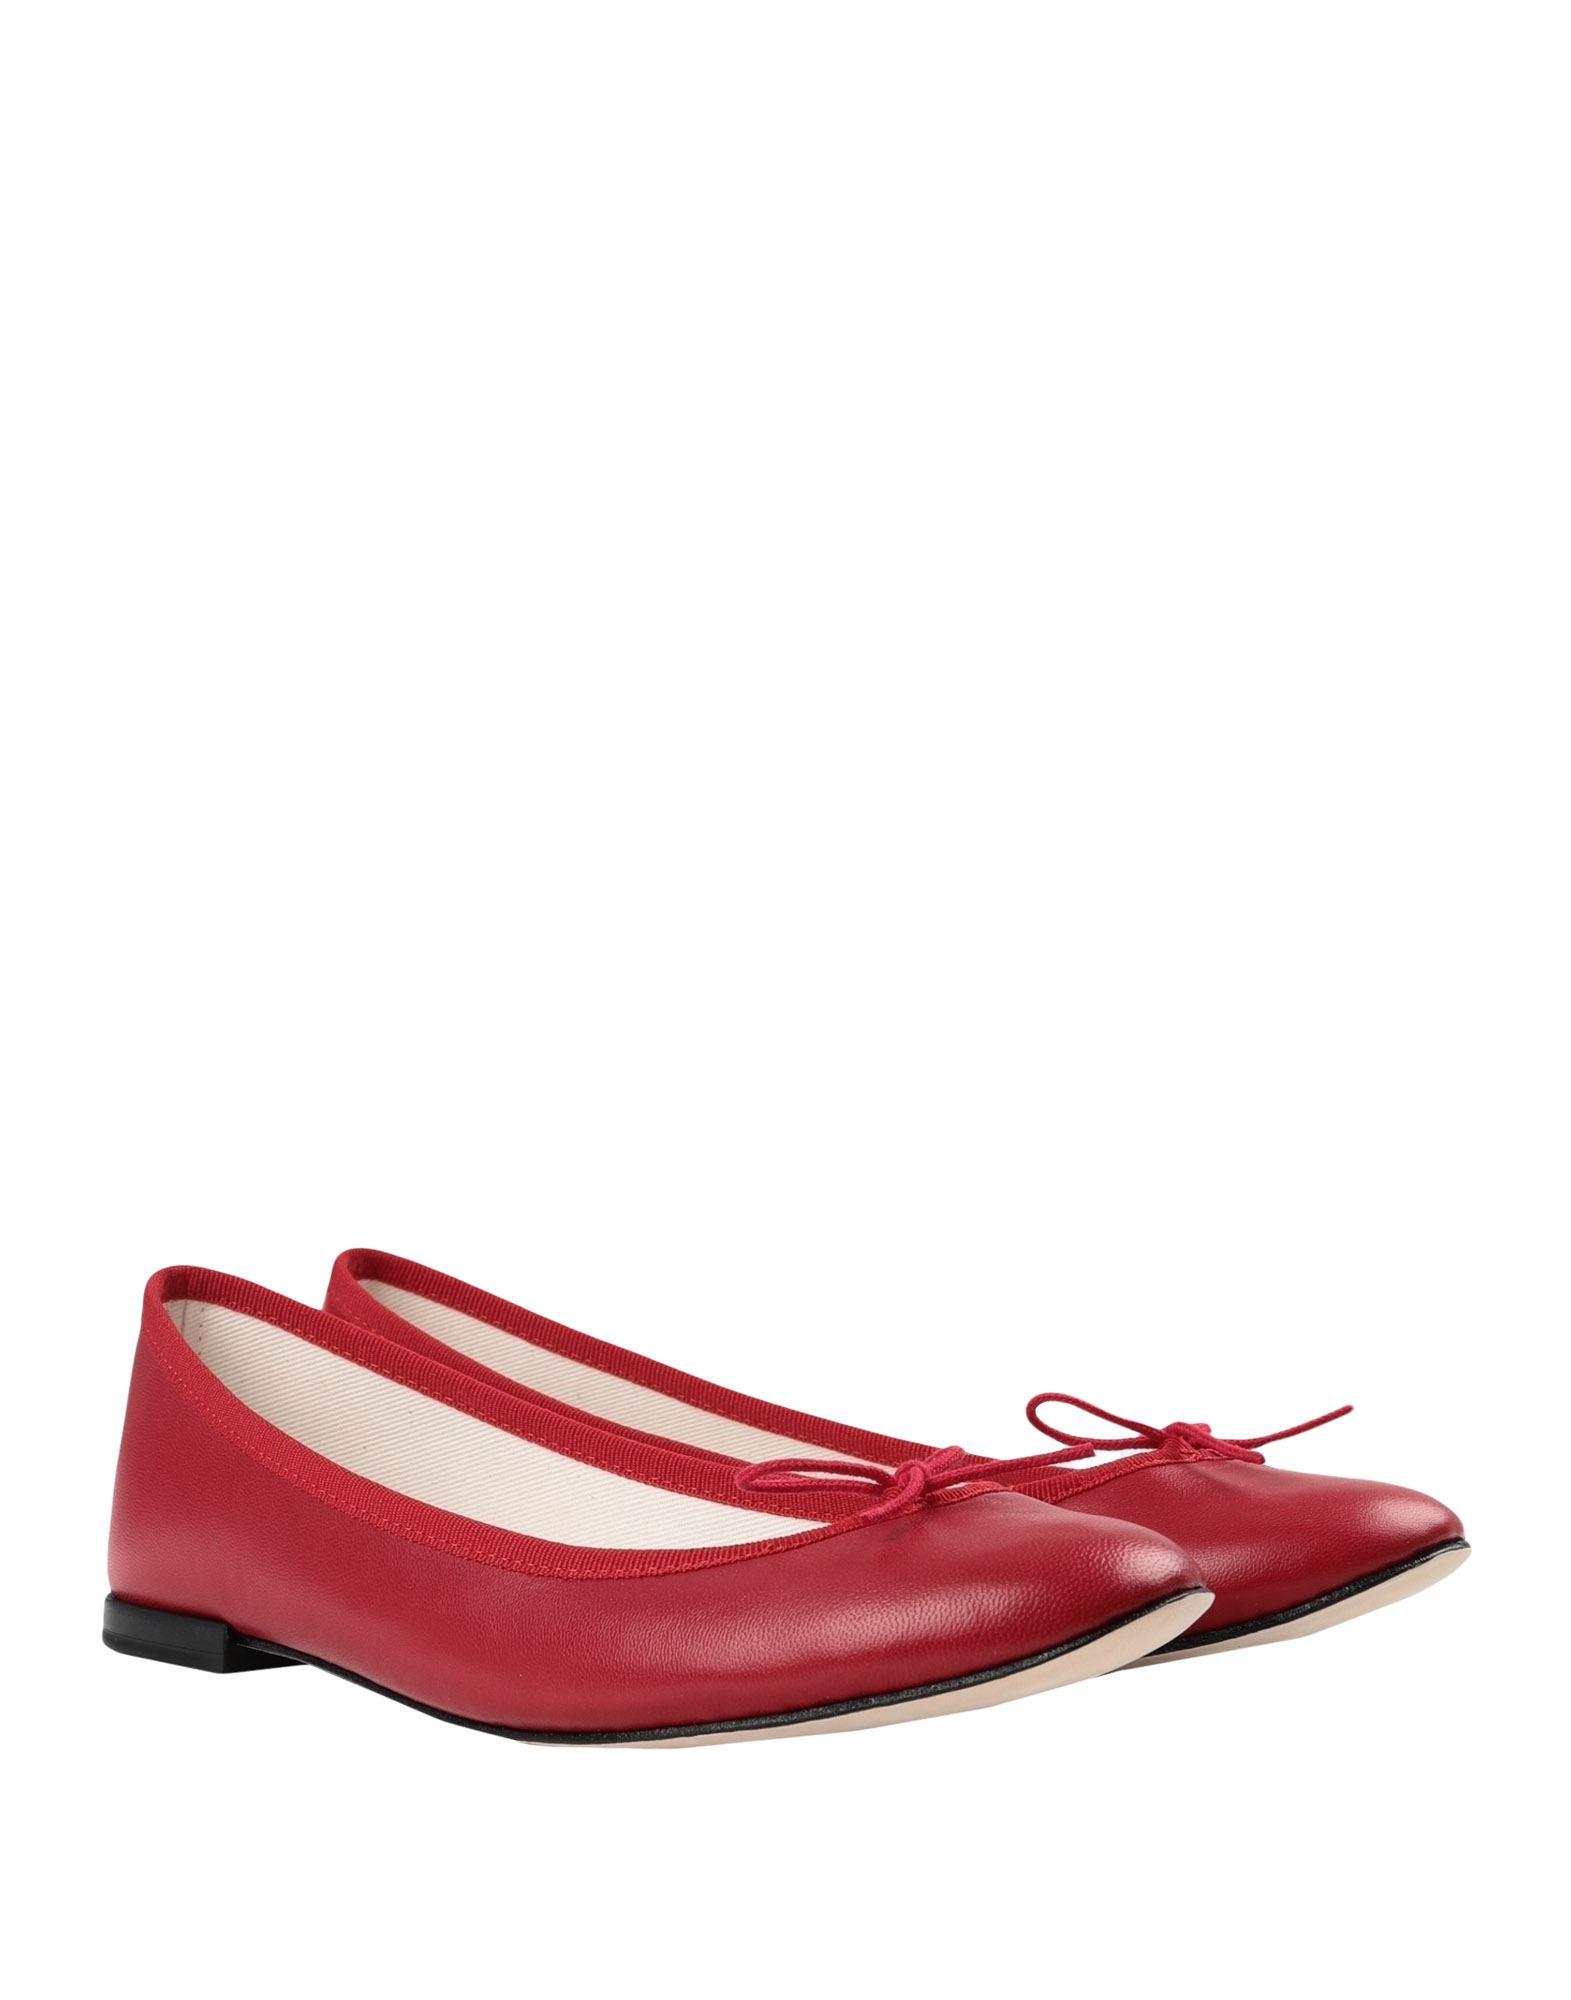 Repetto Leather Ballet Flats in Red | Lyst